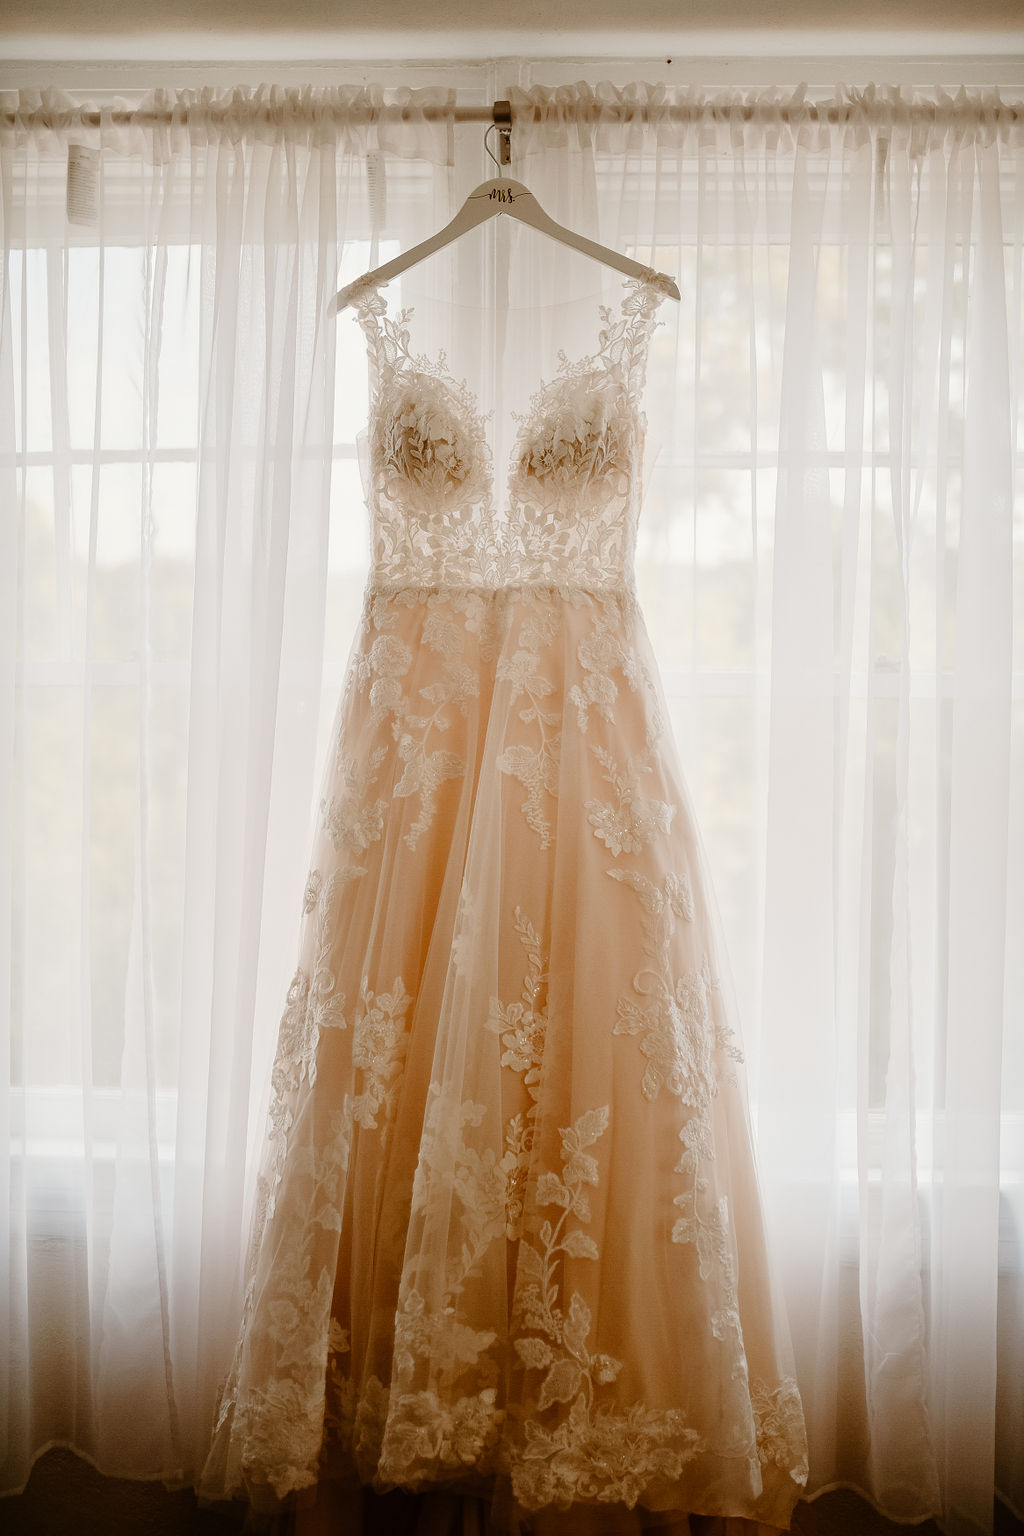 Image of Bridal Gown